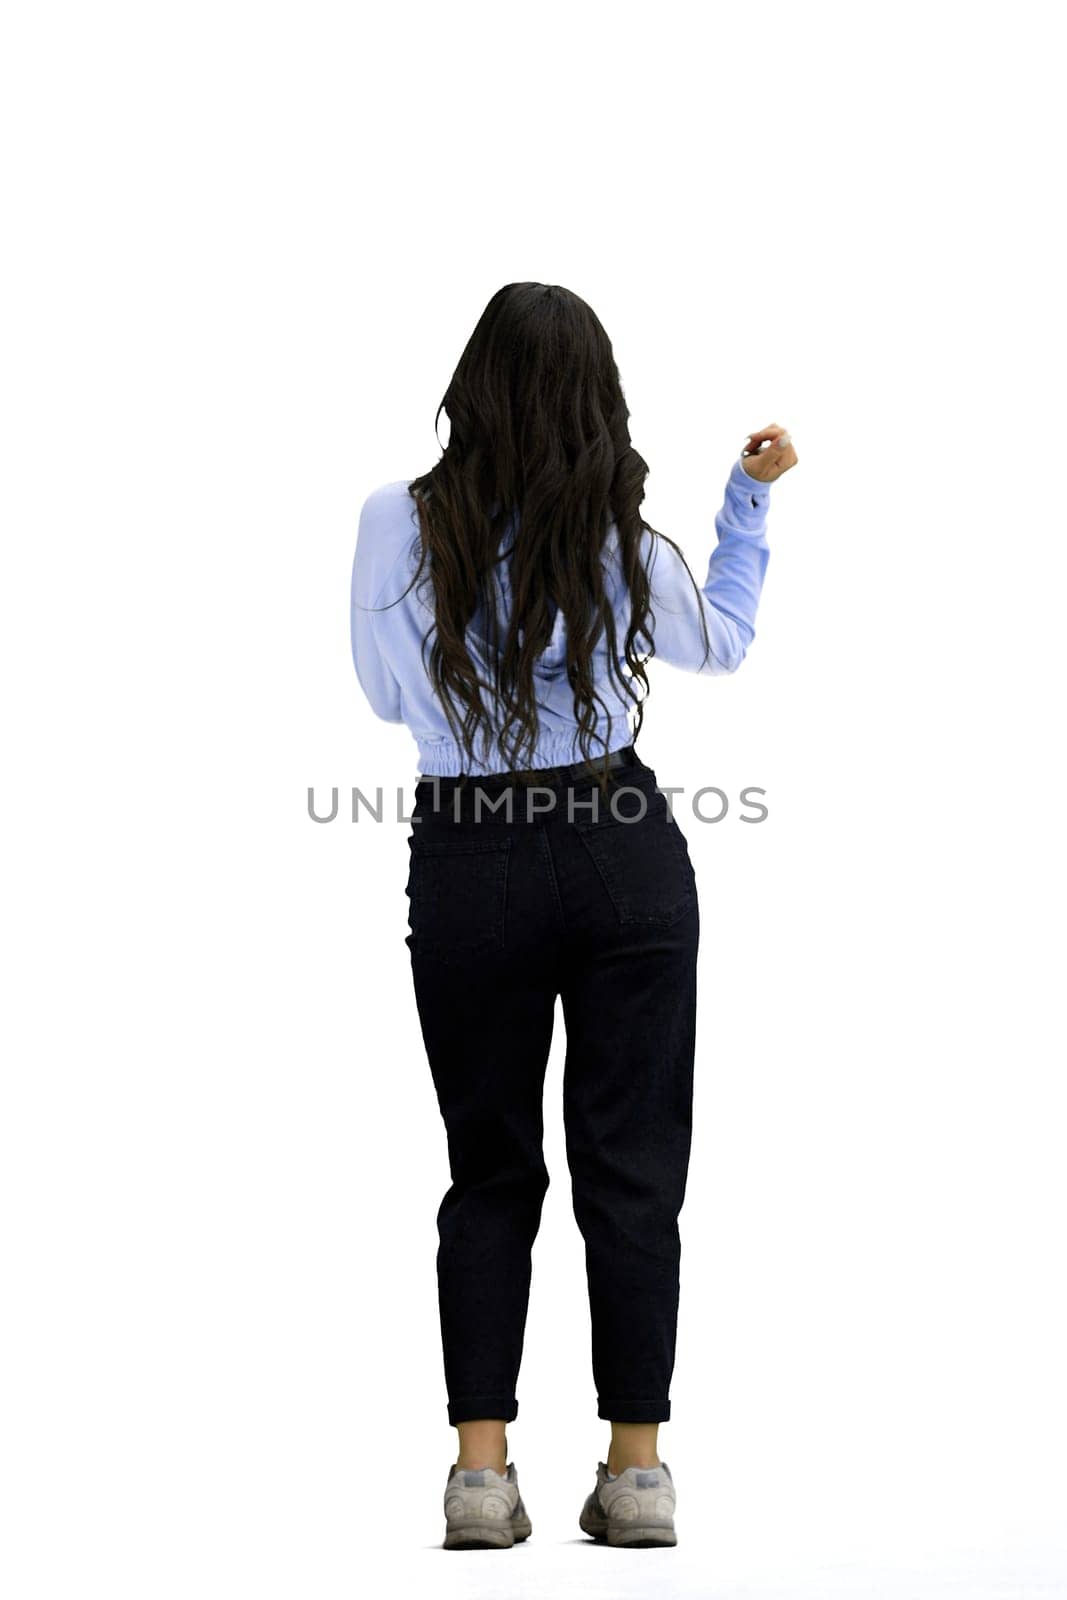 A woman, full-length, on a white background by Prosto